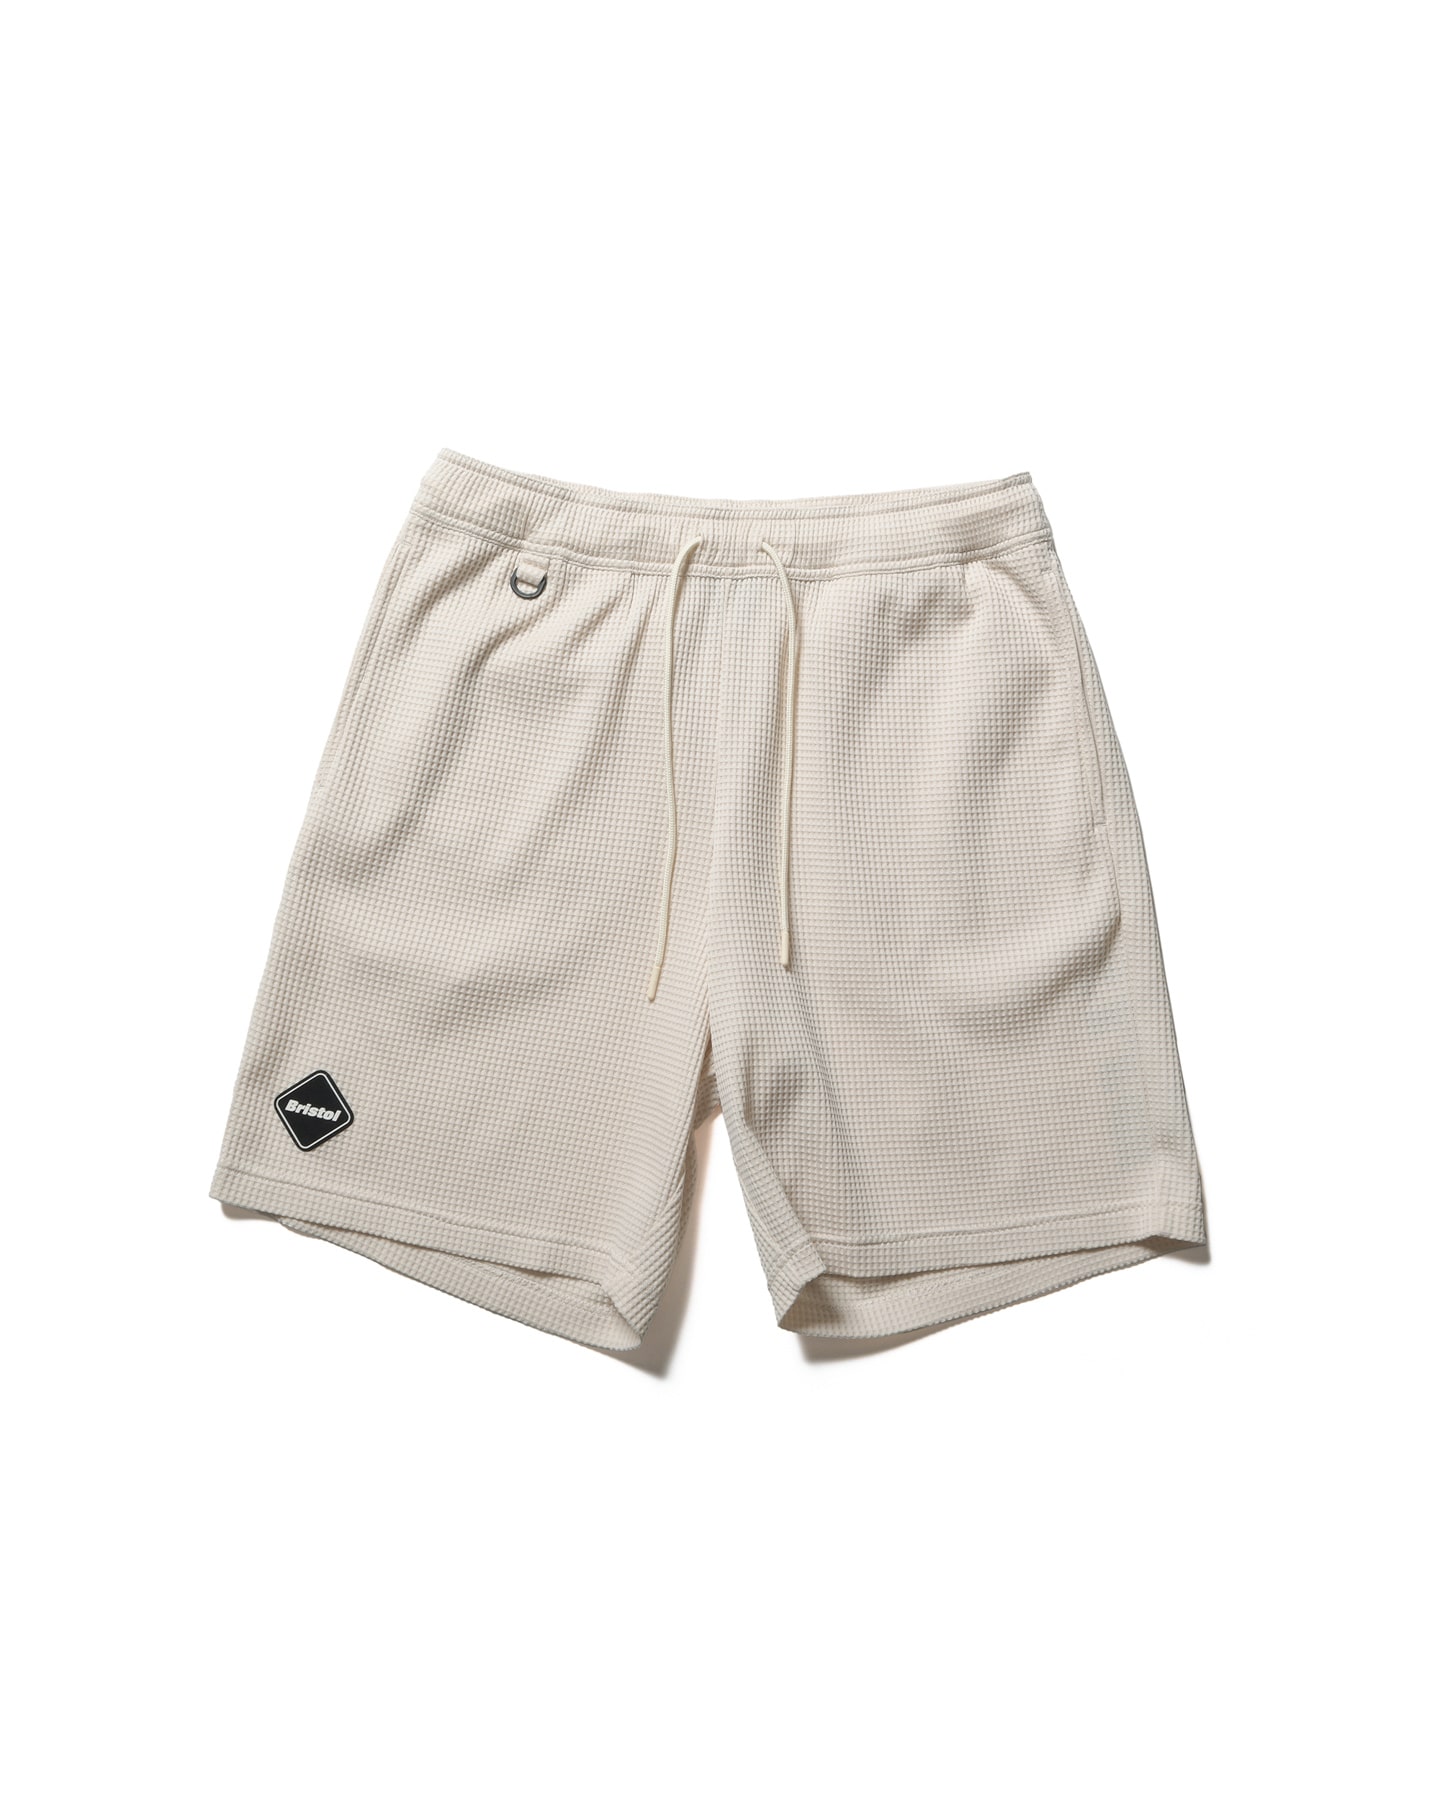 SOPH. | TECH WAFFLE TEAM RELAX SHORTS(M OFF WHITE):